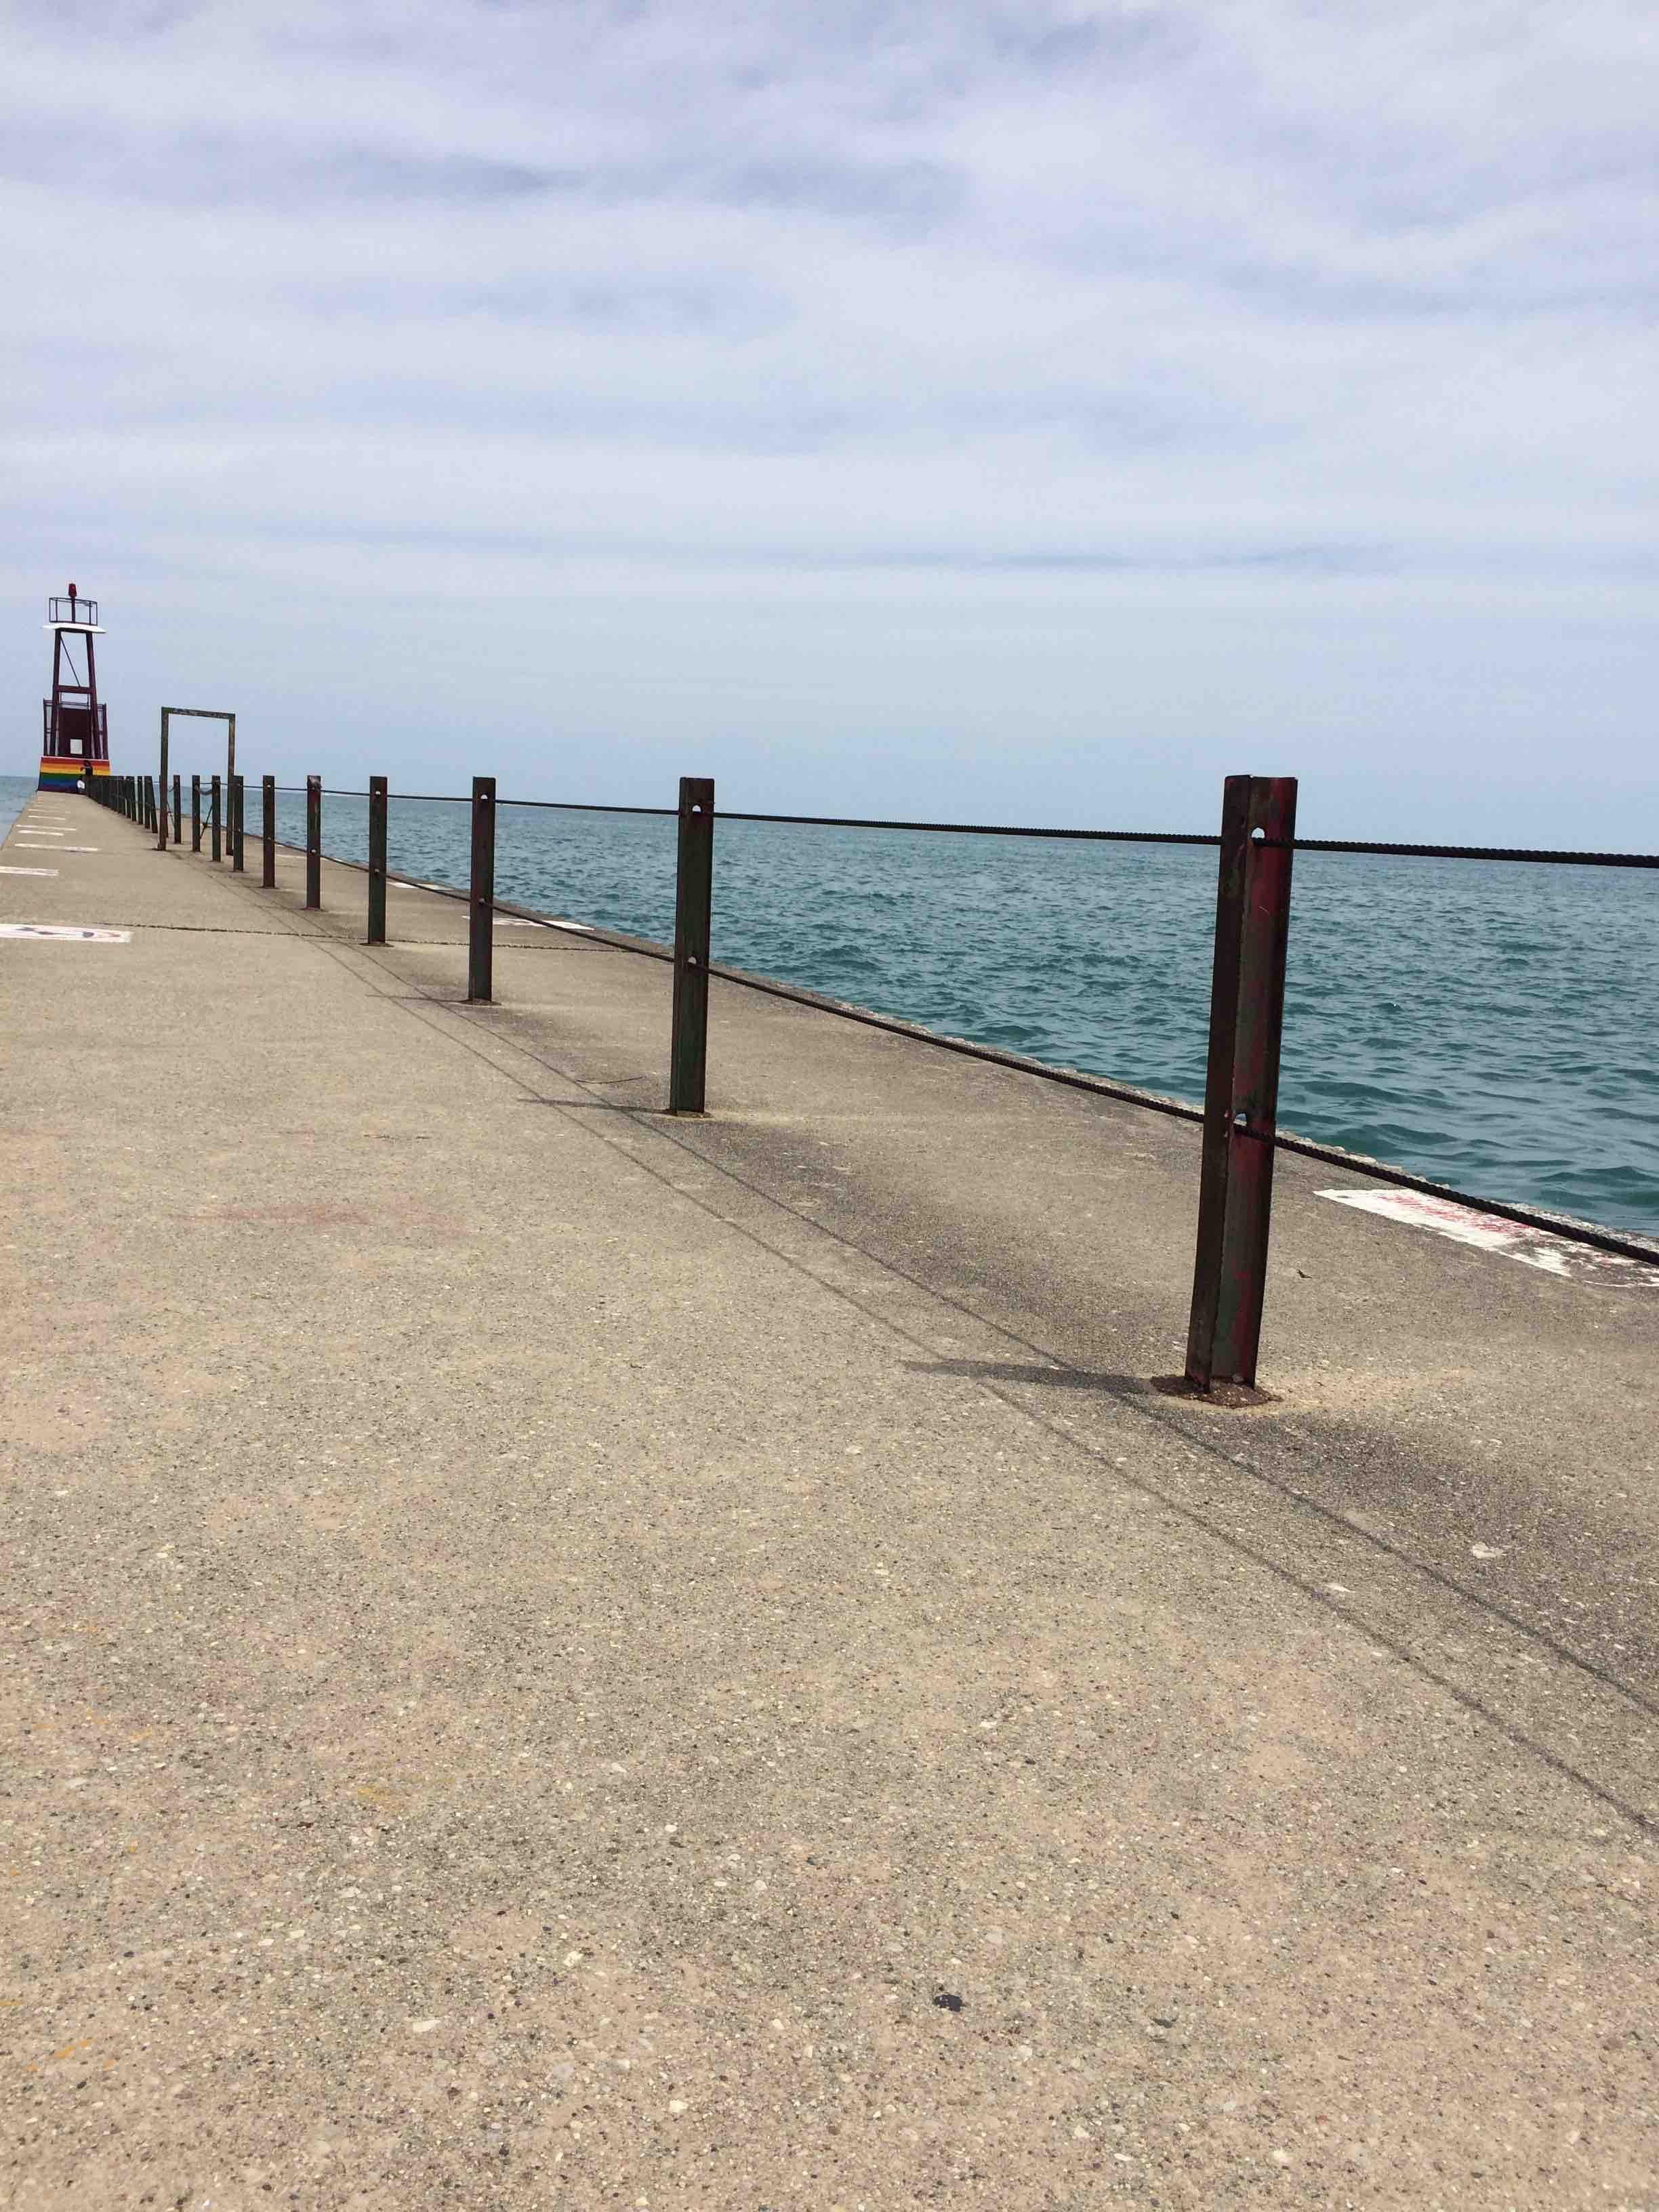 From where I was sitting on the pier, the water fits almost perfectly between the fence cords.